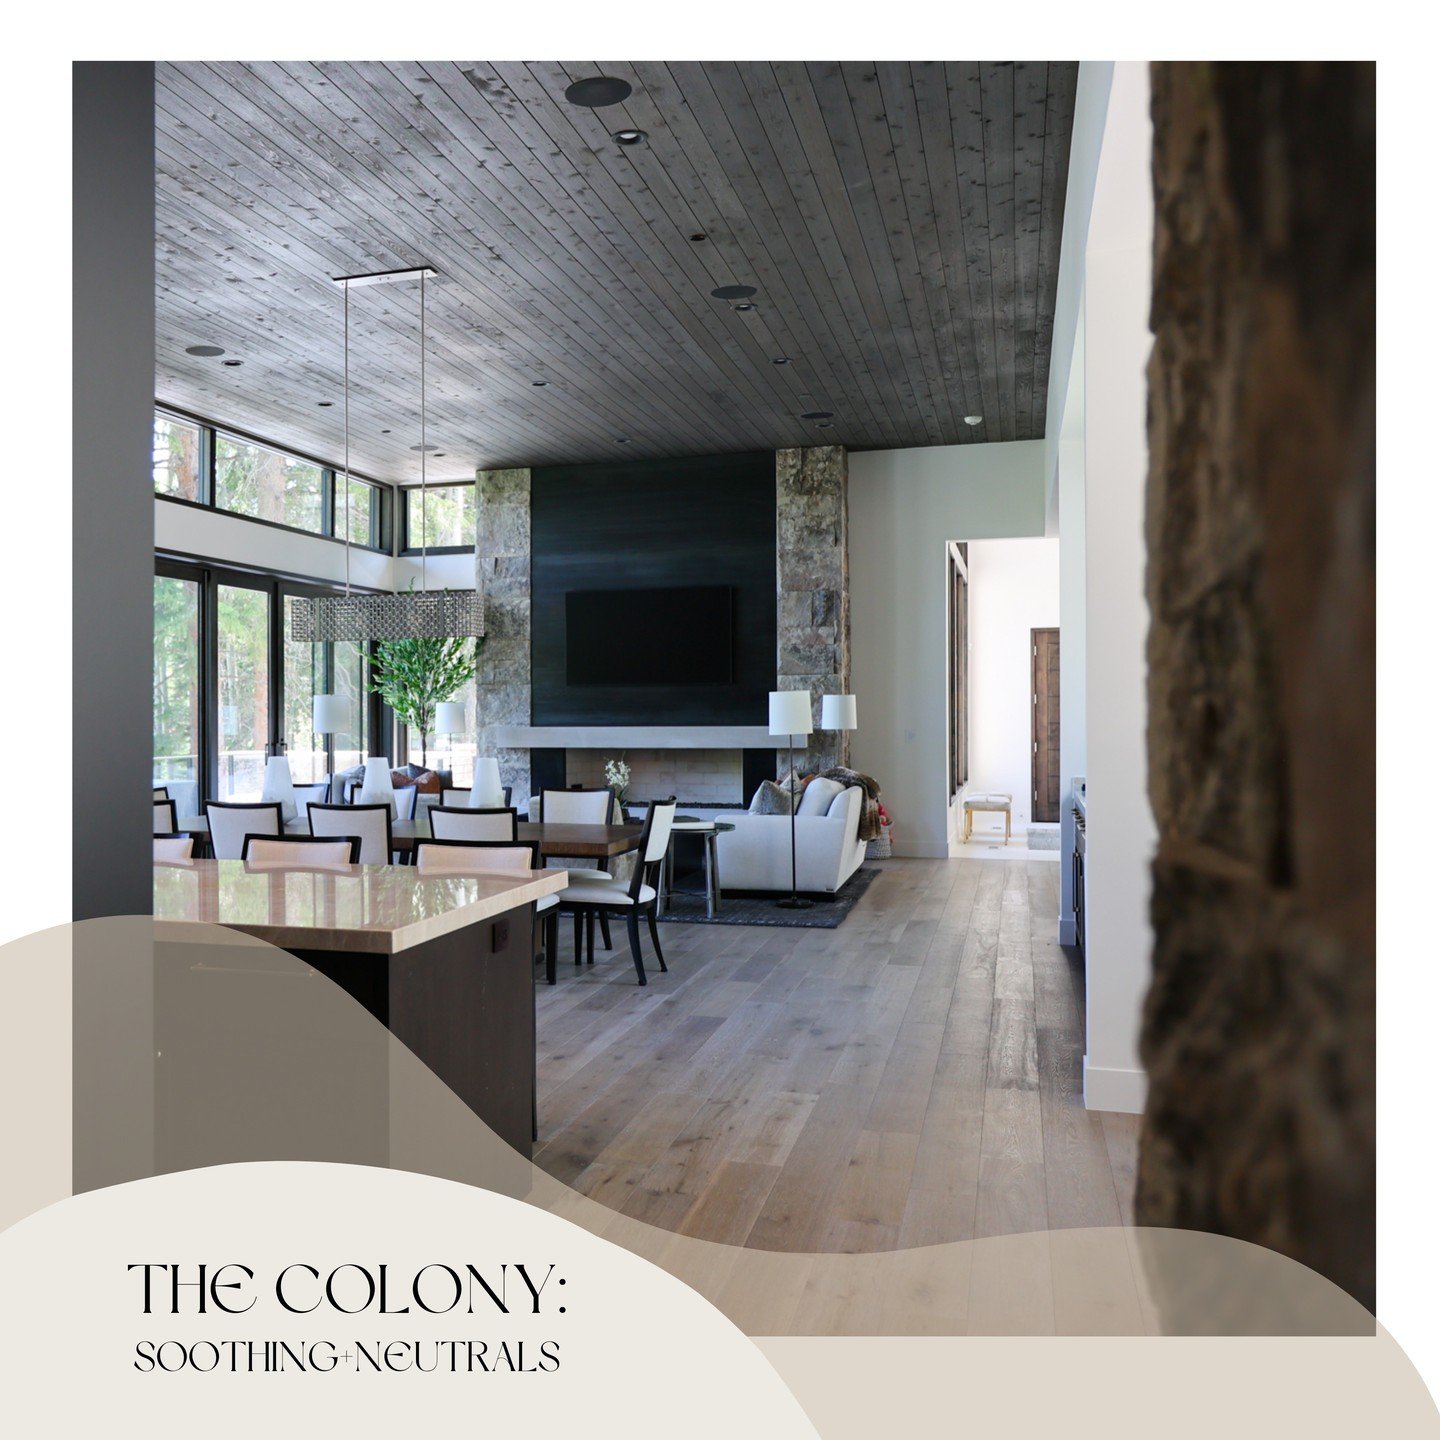 Found in the picturesque community of The Colony, Park City, Utah, this home has a calming atmosphere with neutral colors. The interior feels serene, and the large windows bring in plenty of natural light. It is a comfy retreat with a soothing feel. 